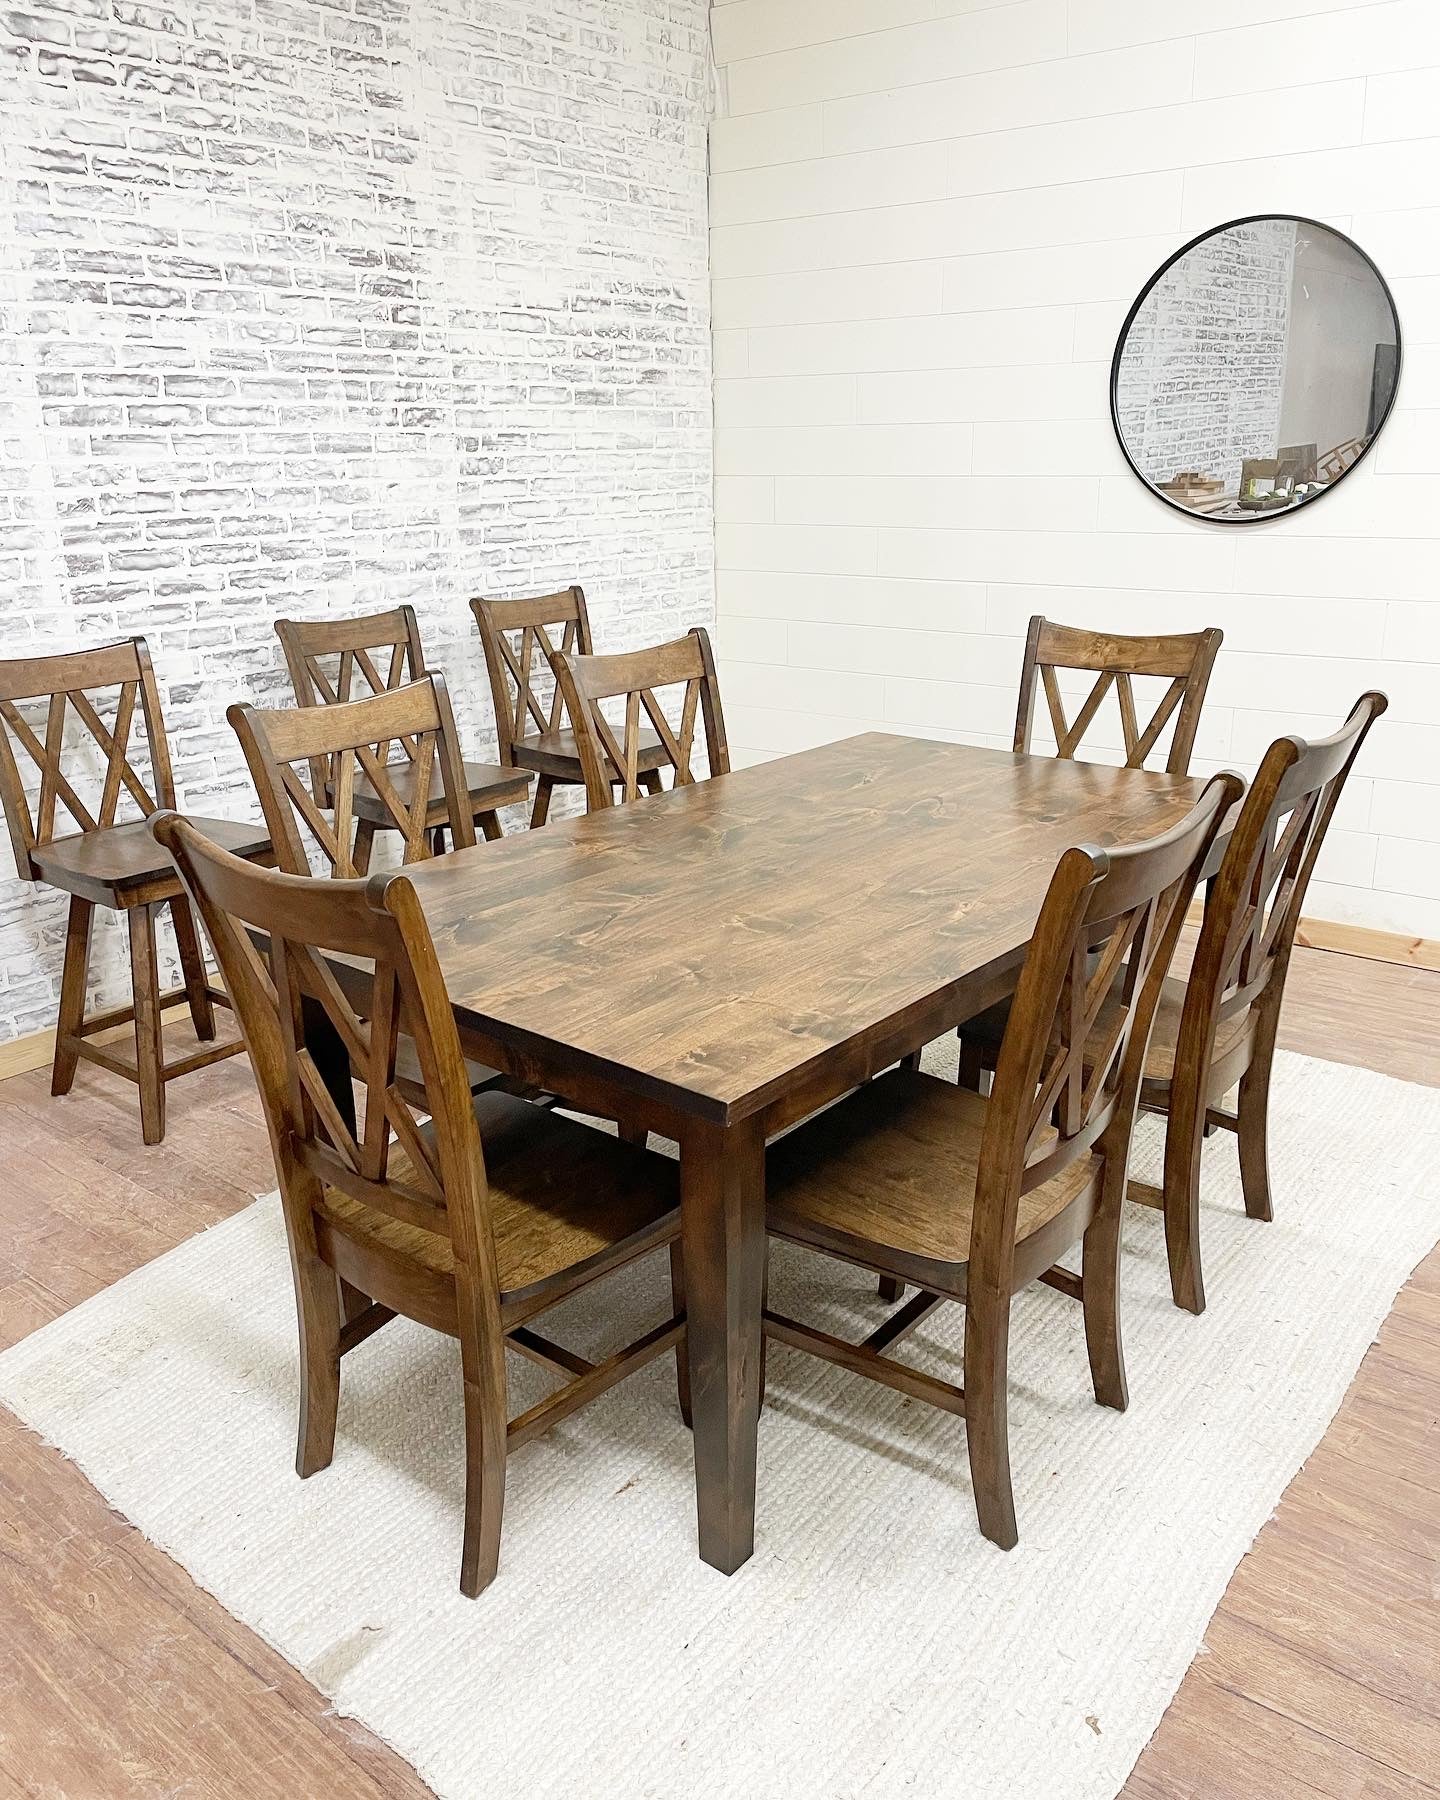 Pictured with a 6' L x 42" W Rustic Alder table stained Espresso. Pictured with 6 Double Cross Back Chairs and 3 Double Cross Back Swivel Counter Height Stools.